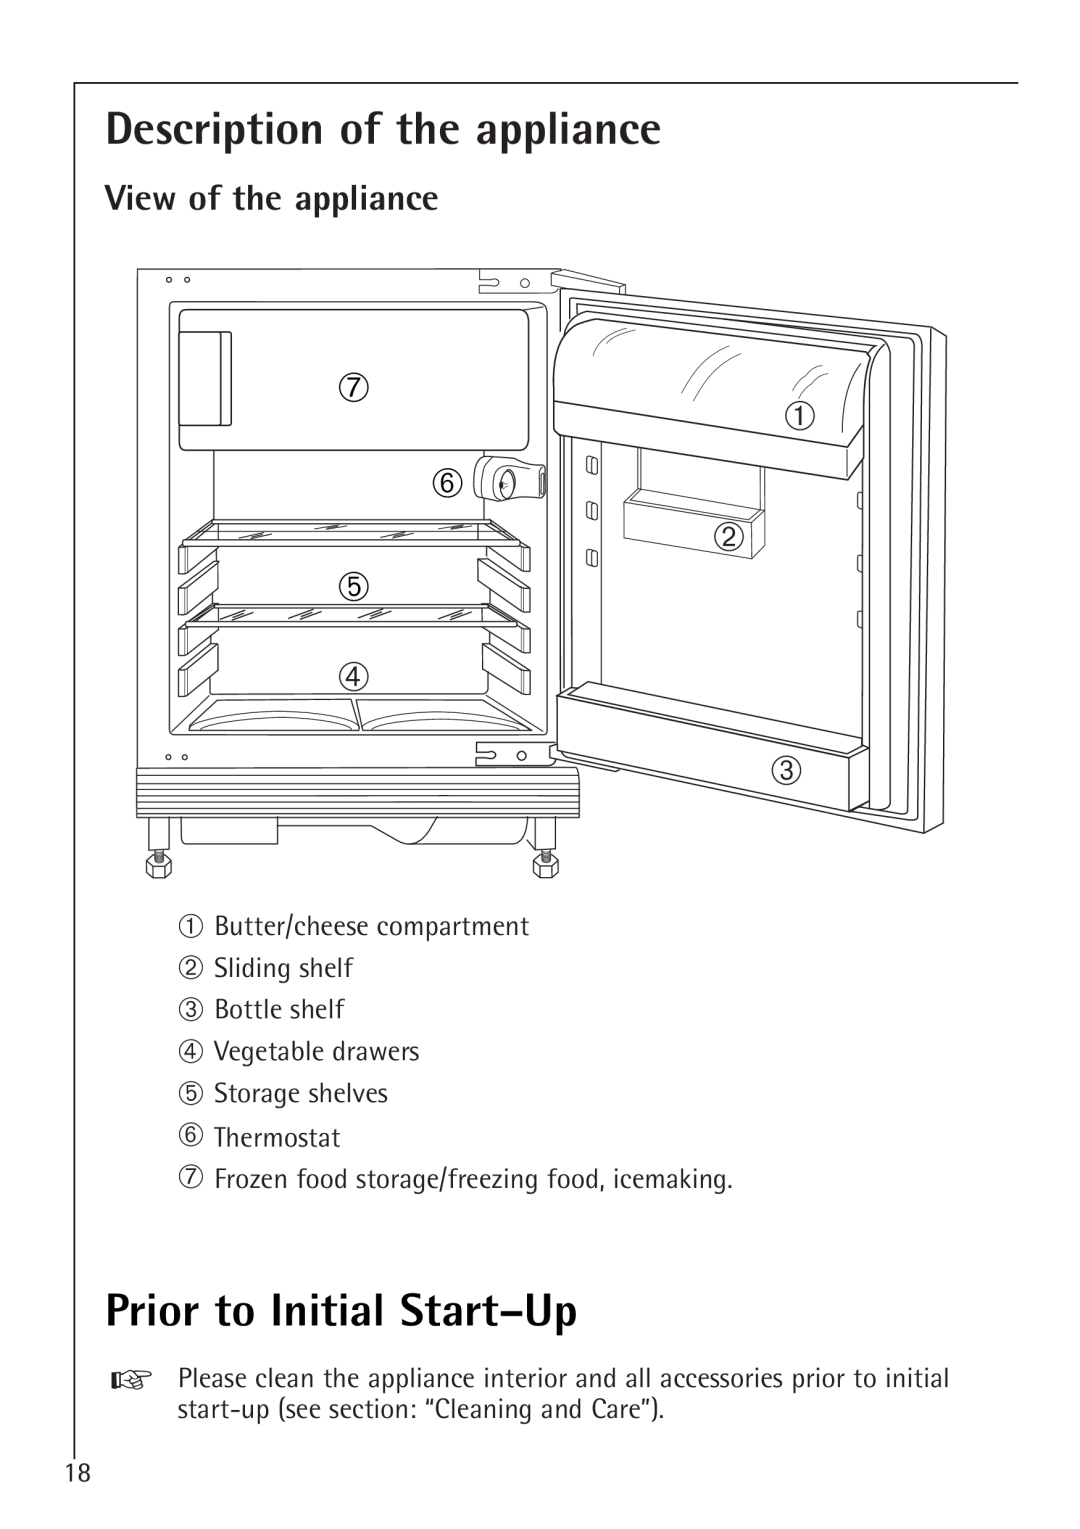 Electrolux SANTO U 86040 i Description of the appliance, Prior to Initial Start-Up, View of the appliance, ➅ ➁ ➄ ➃ ➂ 